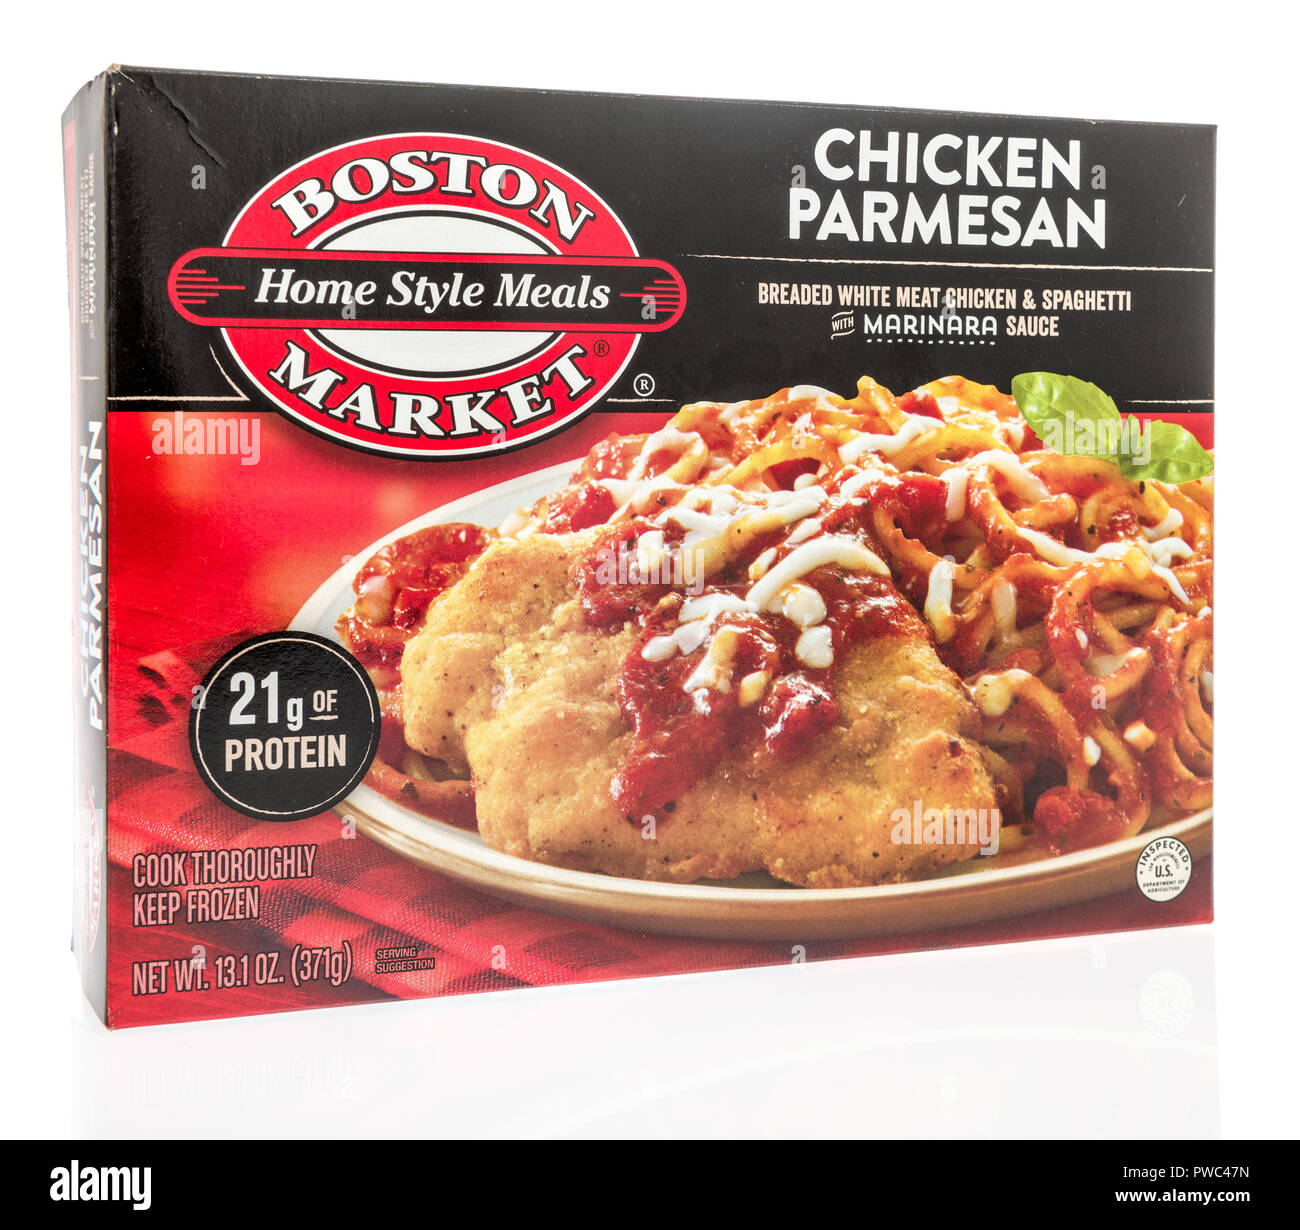 Winneconne, WI - 29 September 2018: A box of Boston Market home style meals in chicken parmesan on an isolated background Stock Photo